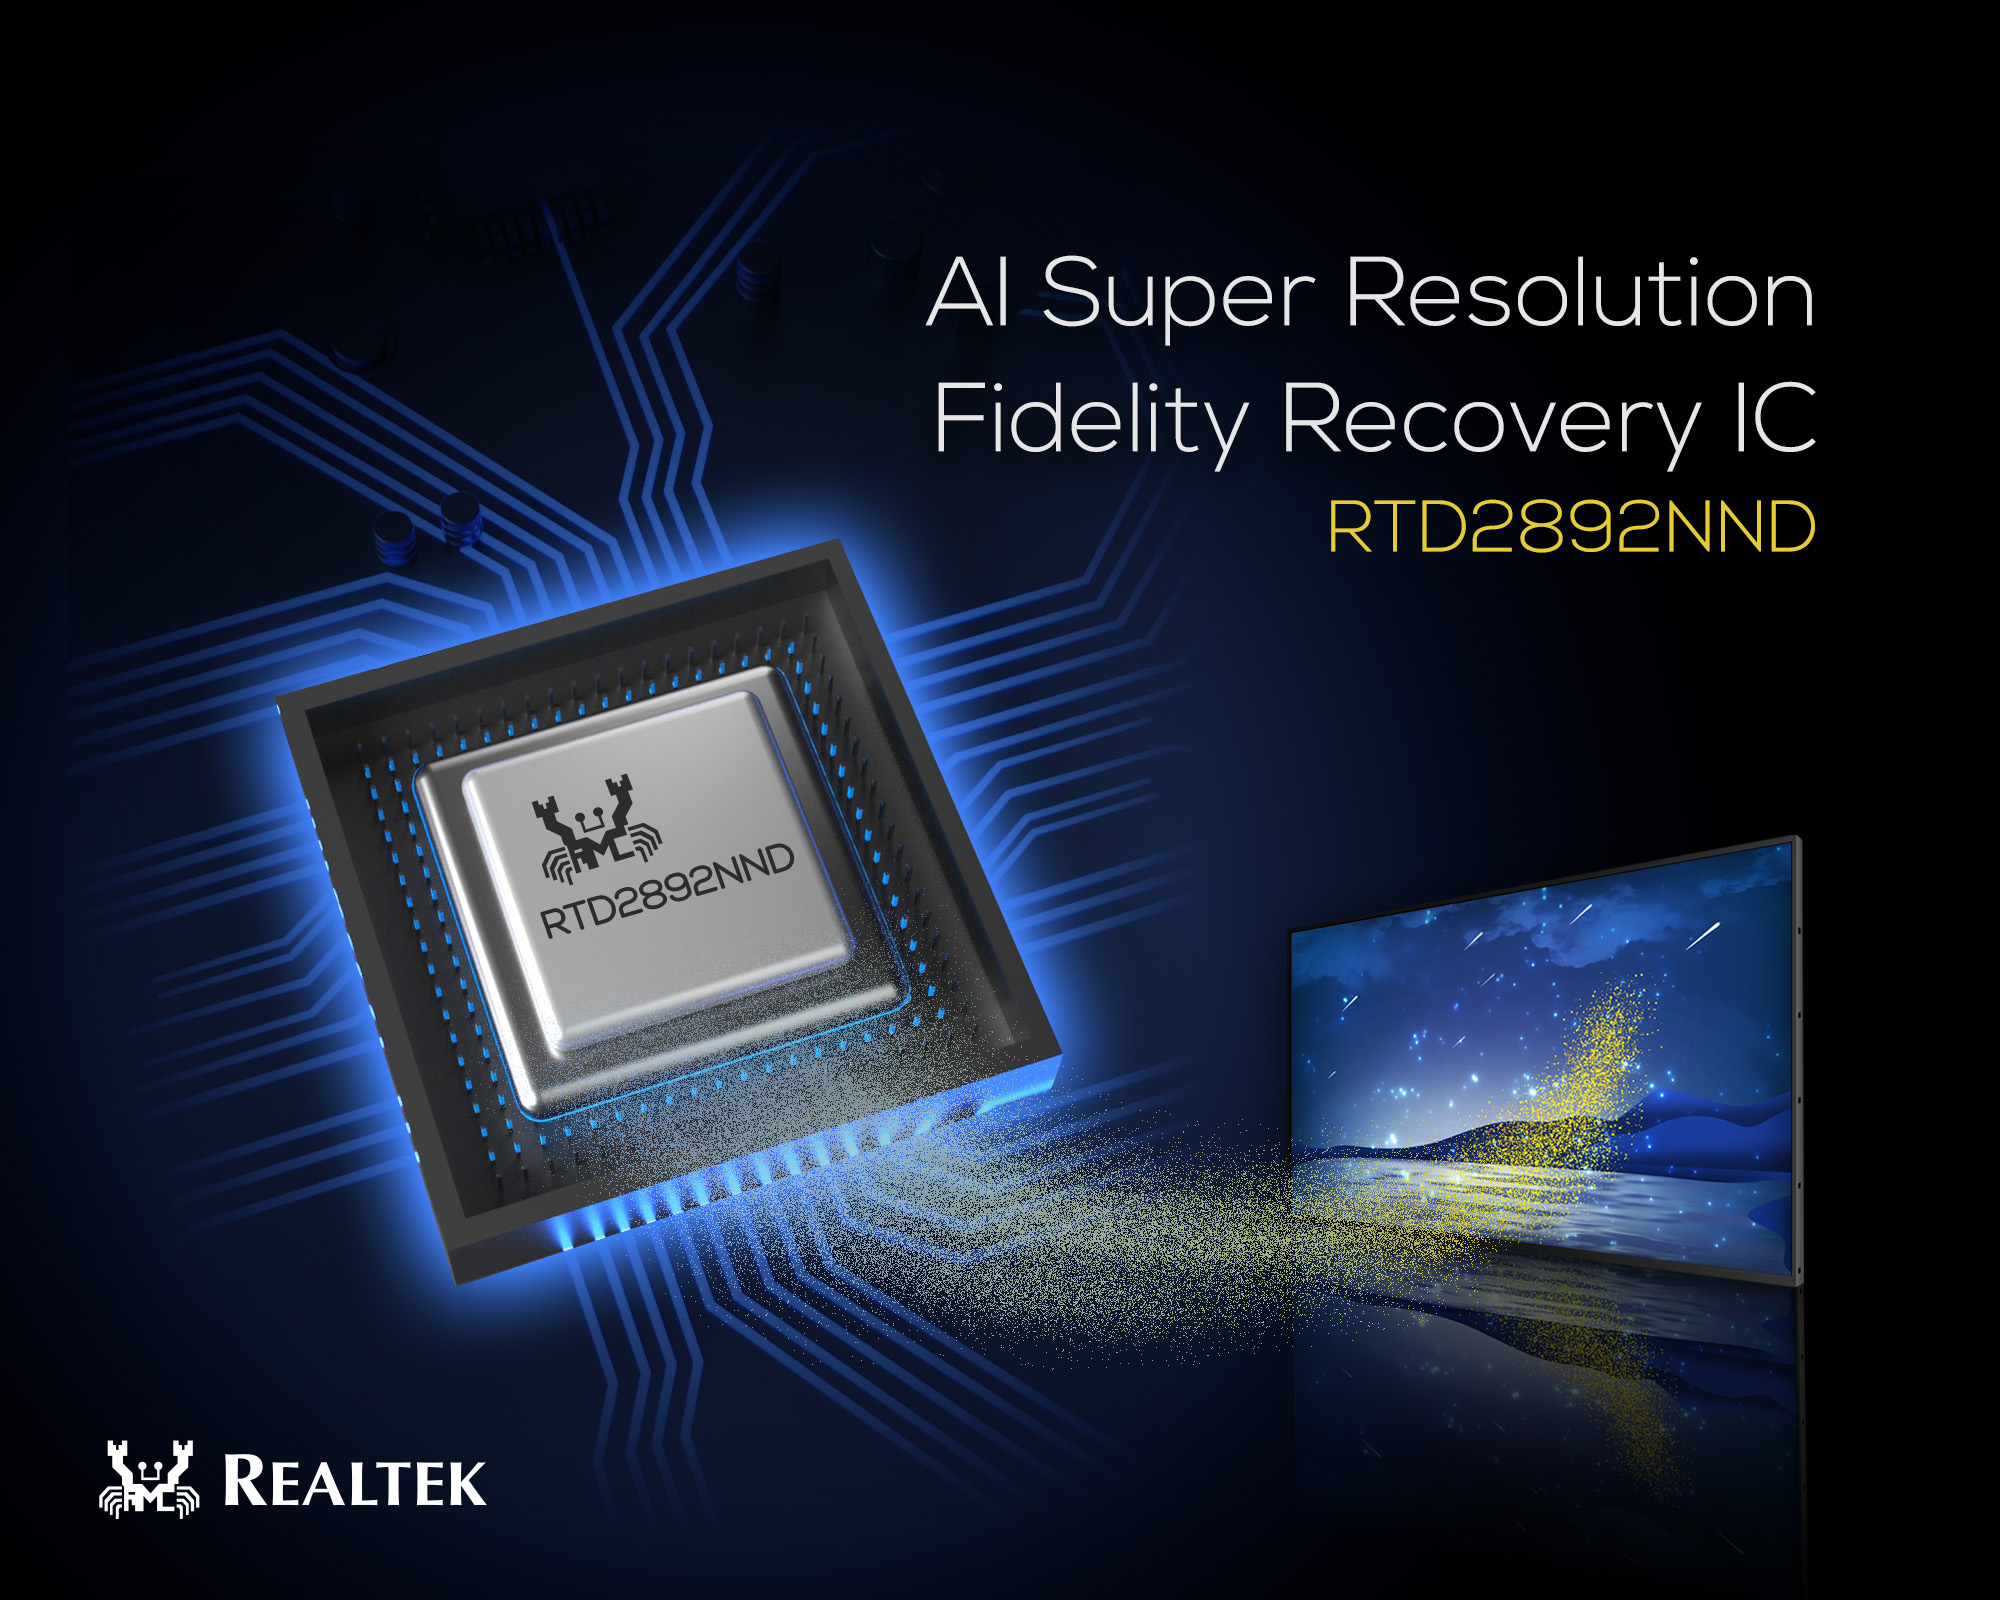 AI Super Resolution Fidelity Recovery IC